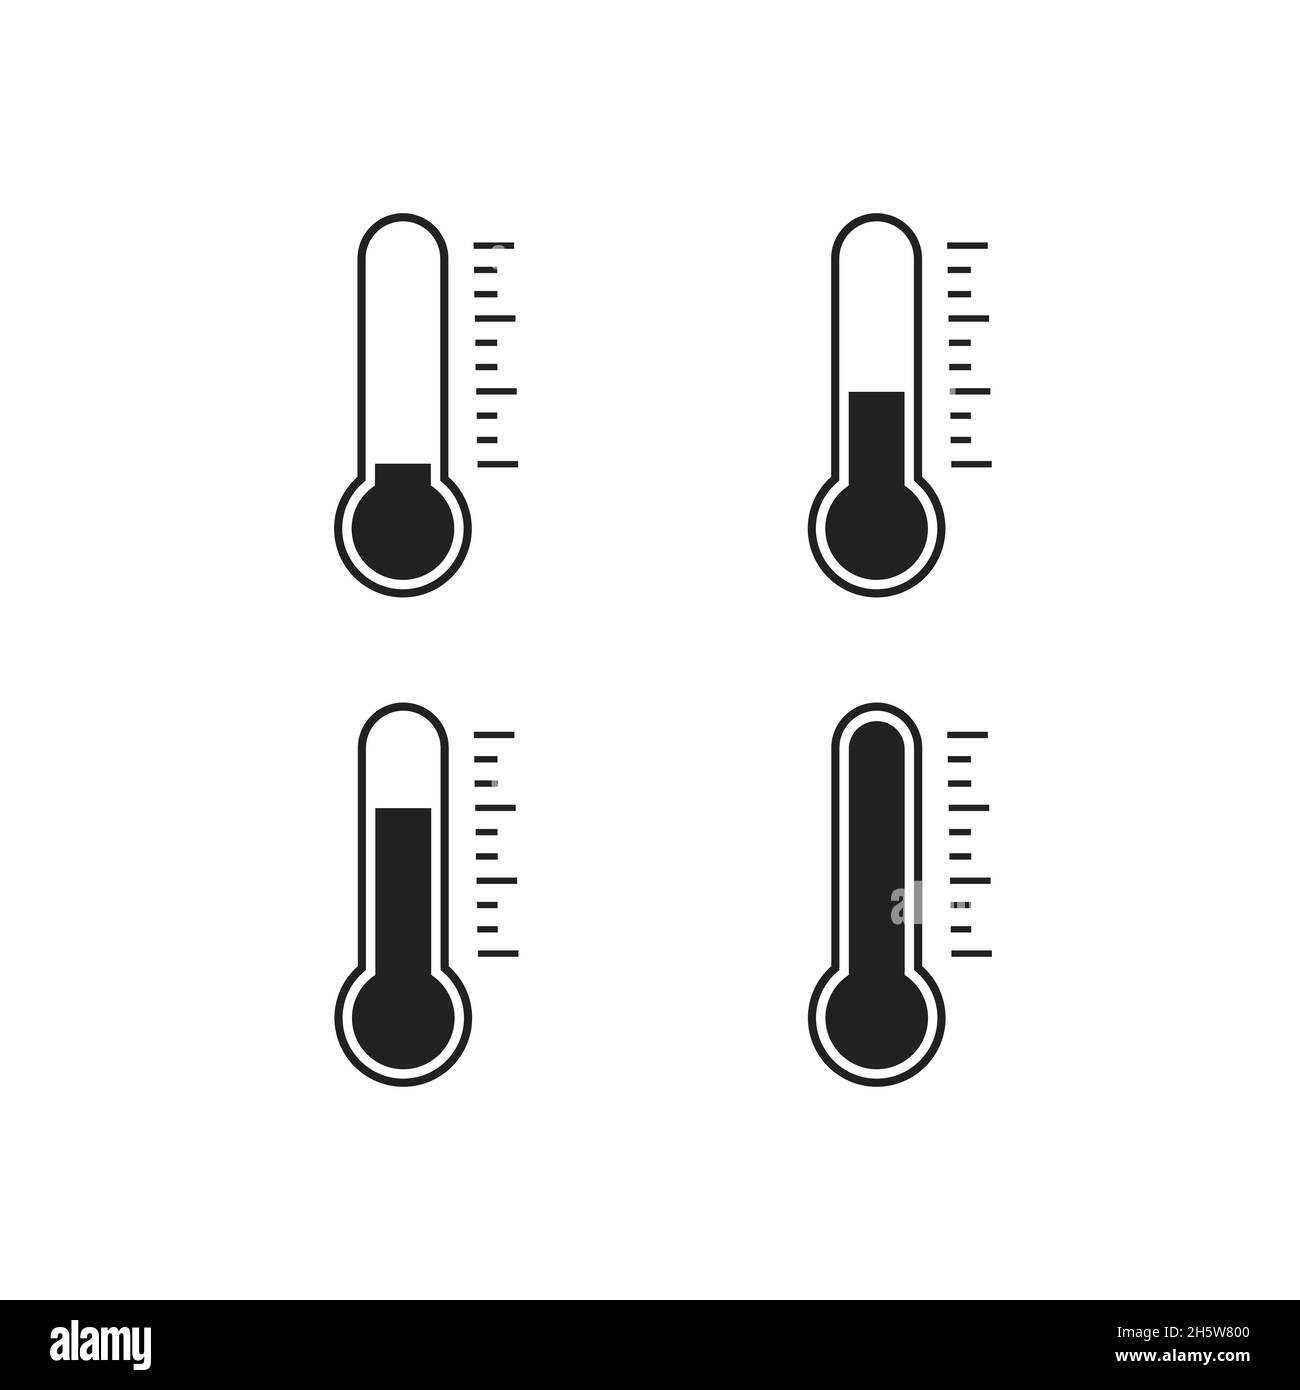 Thermometer of cold and heat Royalty Free Vector Image